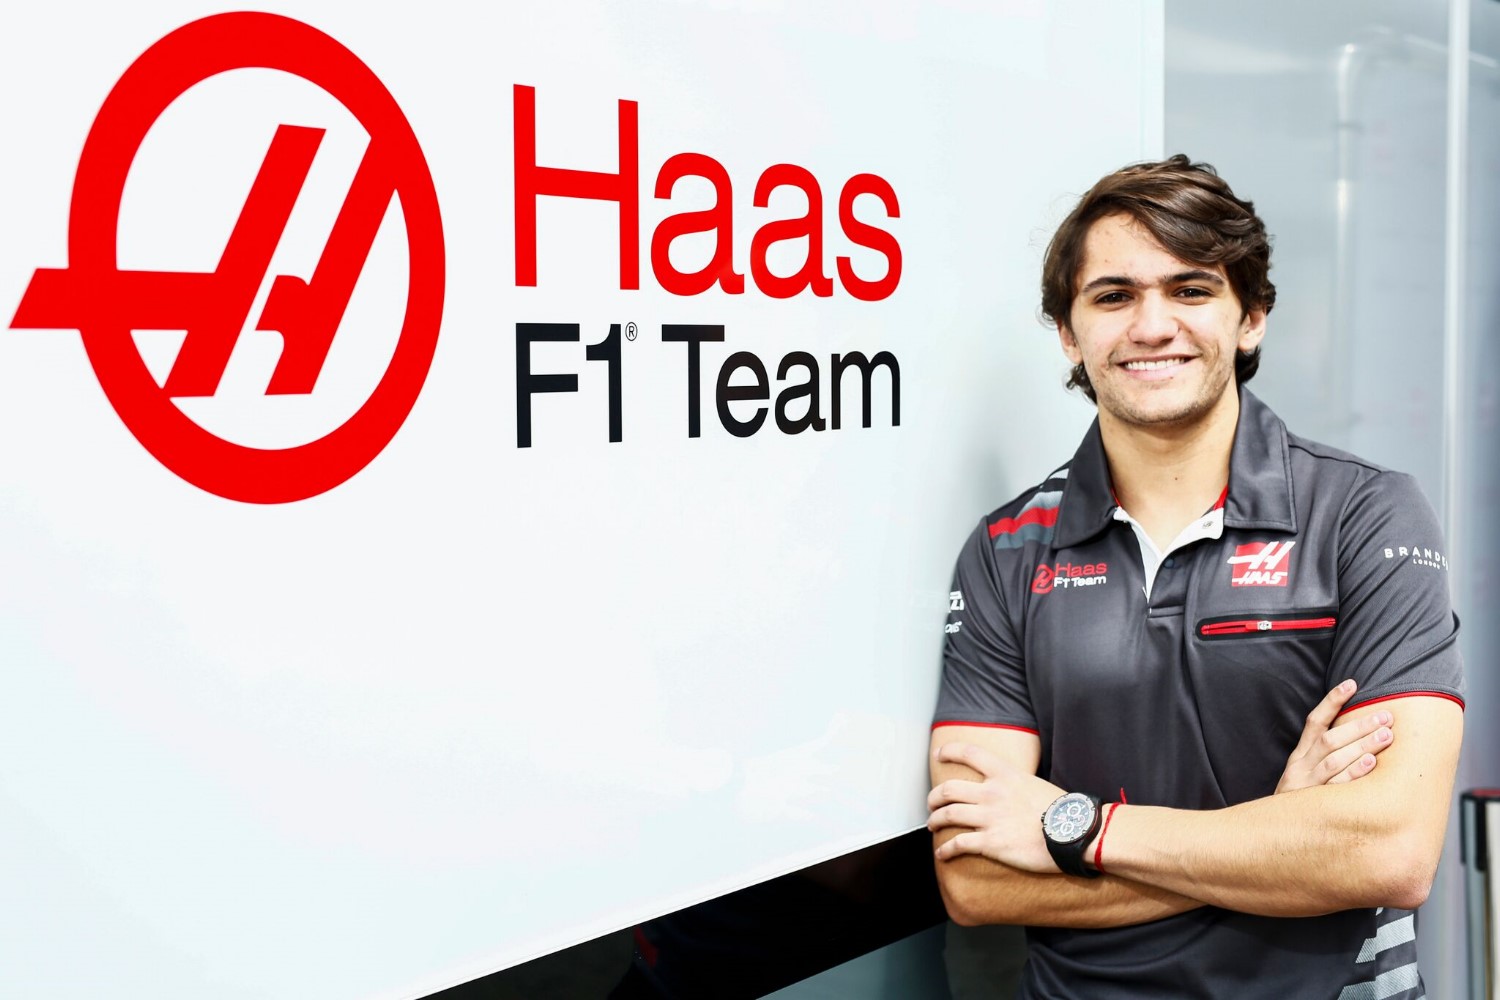 Fittipaldi takes his check out of the IndyCar paddock - foregos career in IndyCar for F1 instead. The Haas team is now 100% non-American